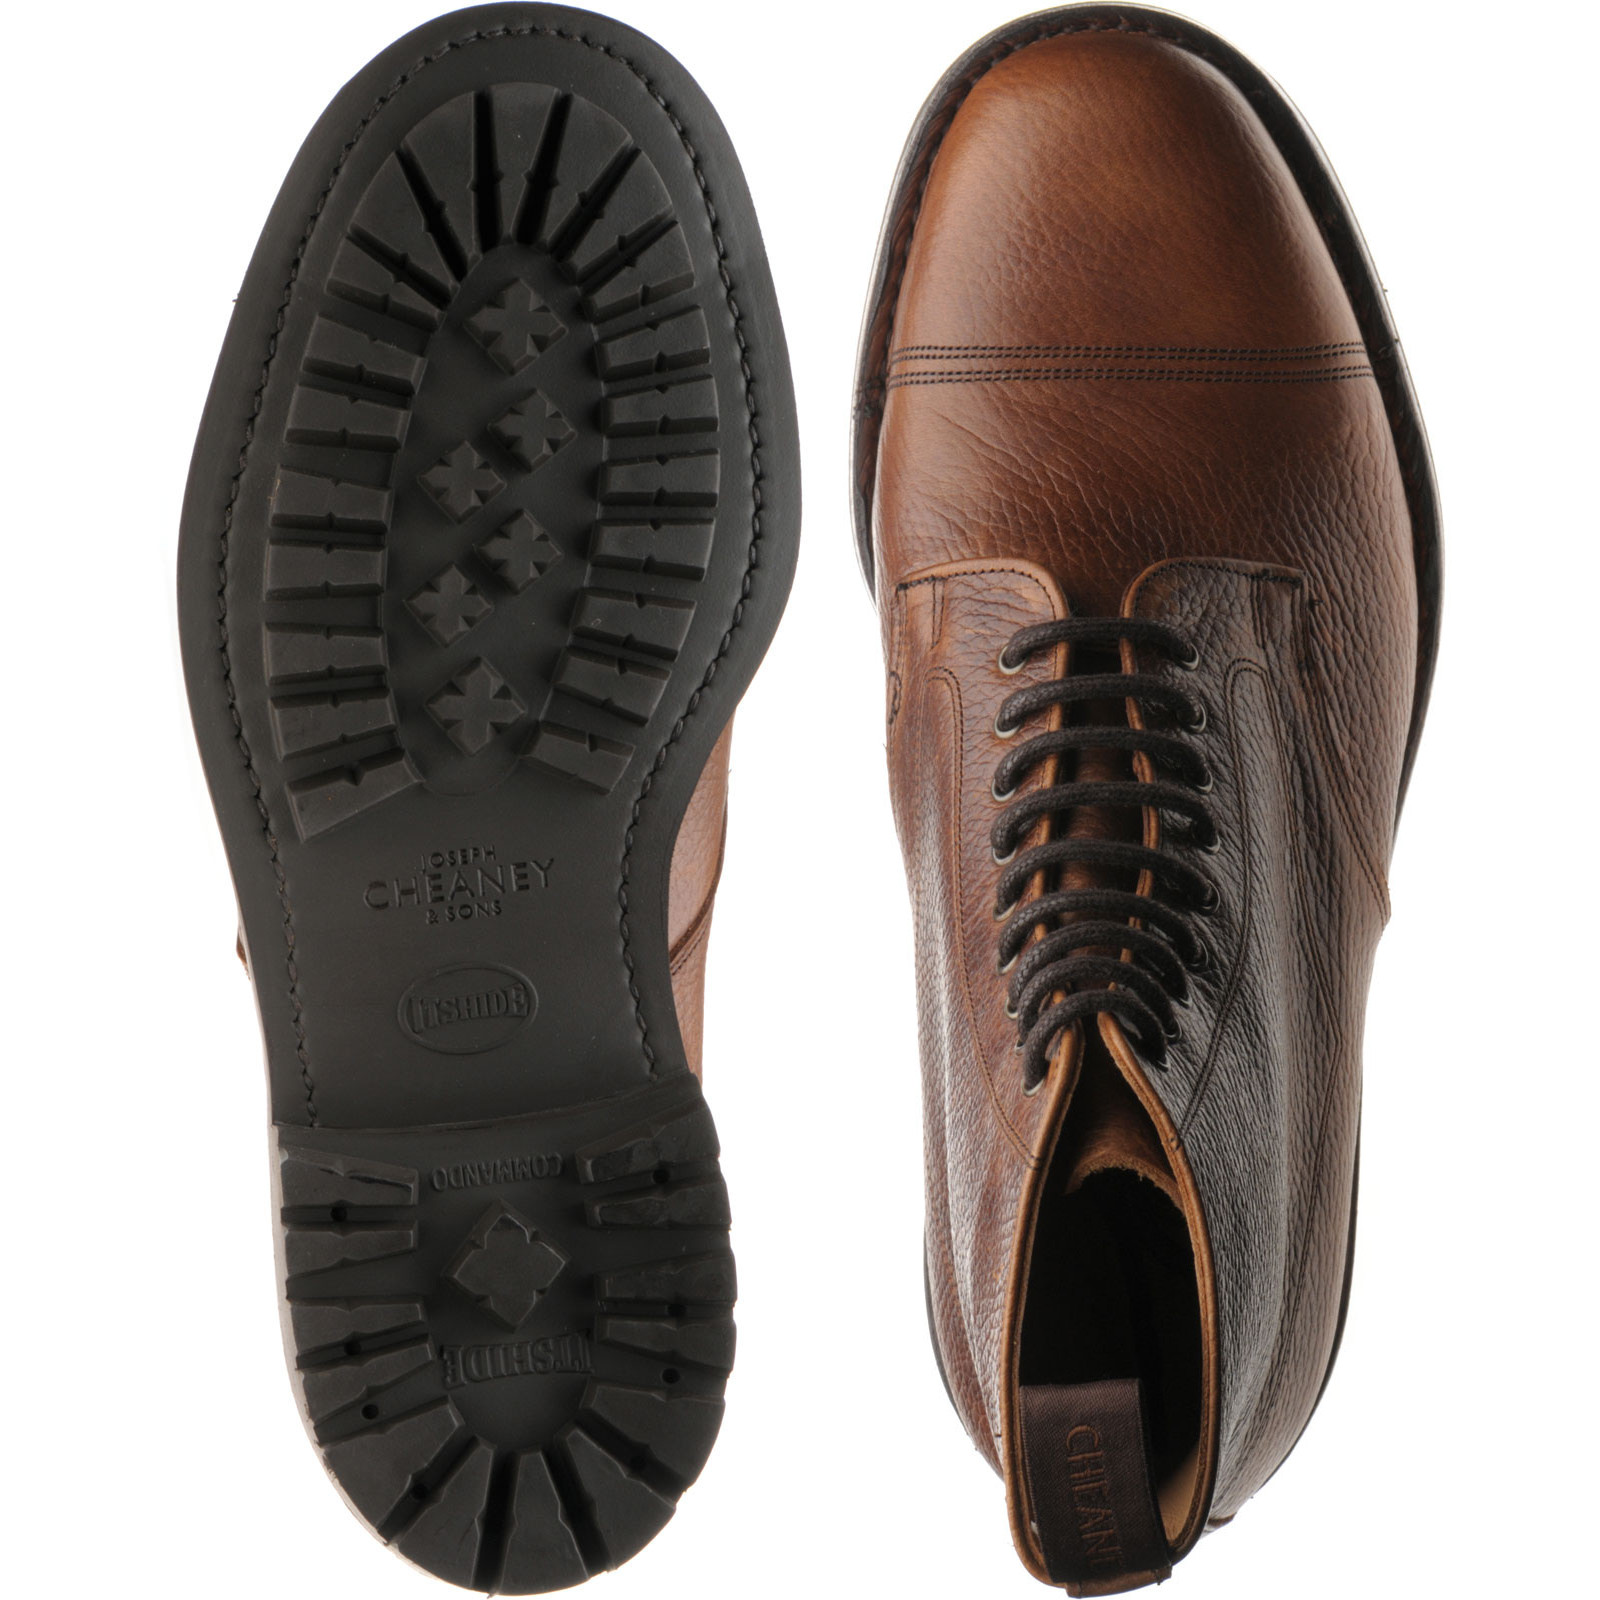 Cheaney shoes | Cheaney Country | Pennine II Rubber rubber-soled boots ...